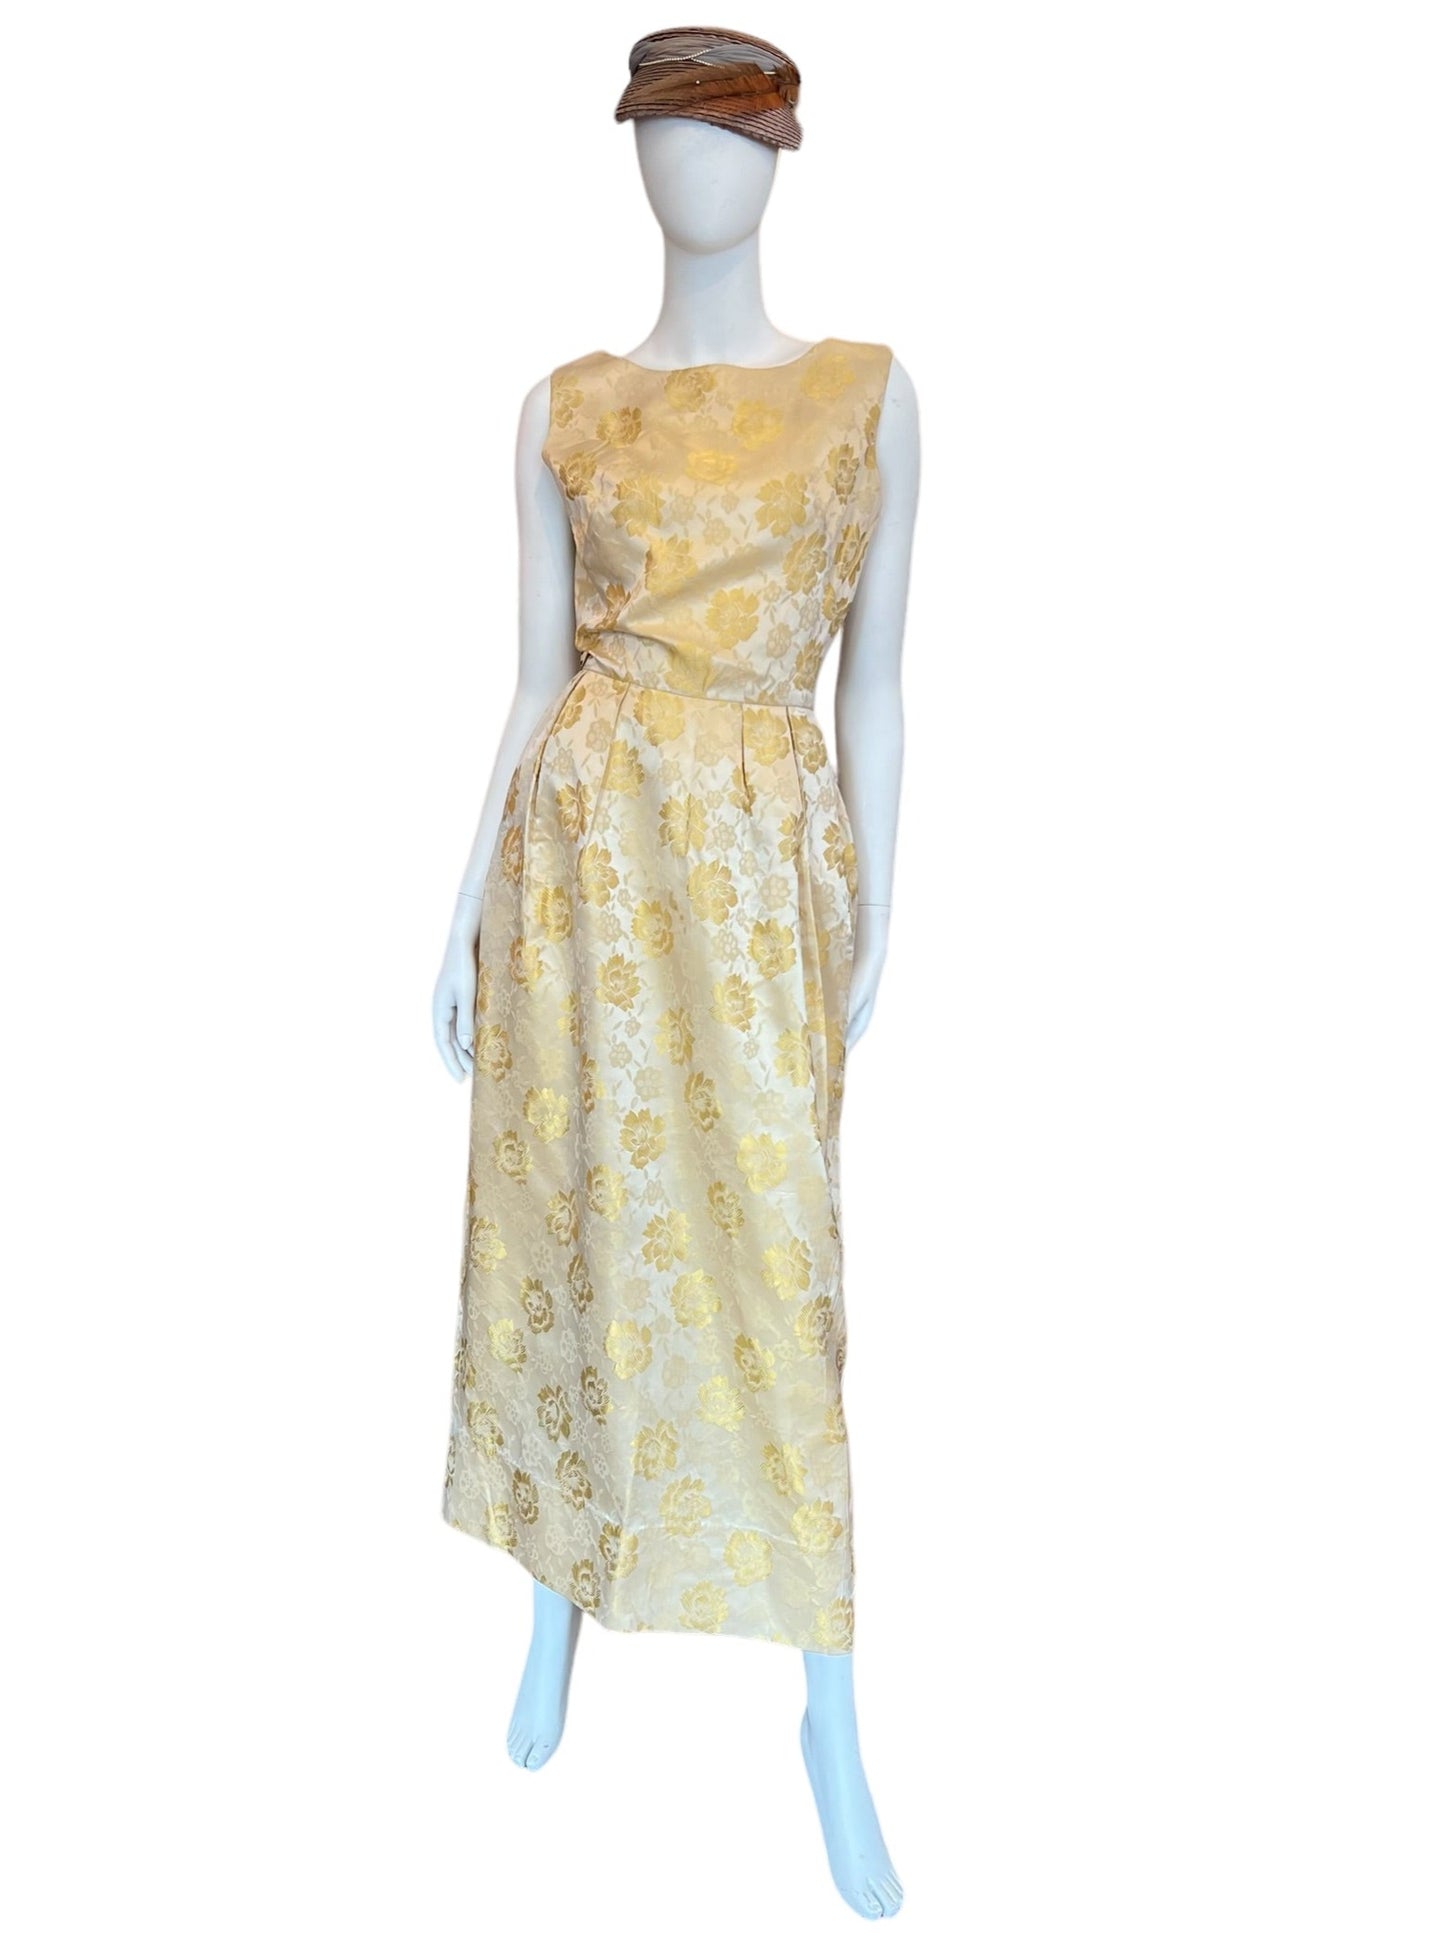 50's style vintage glamour gown - gold taffeta fitted dress hand-made one of a kind stunner